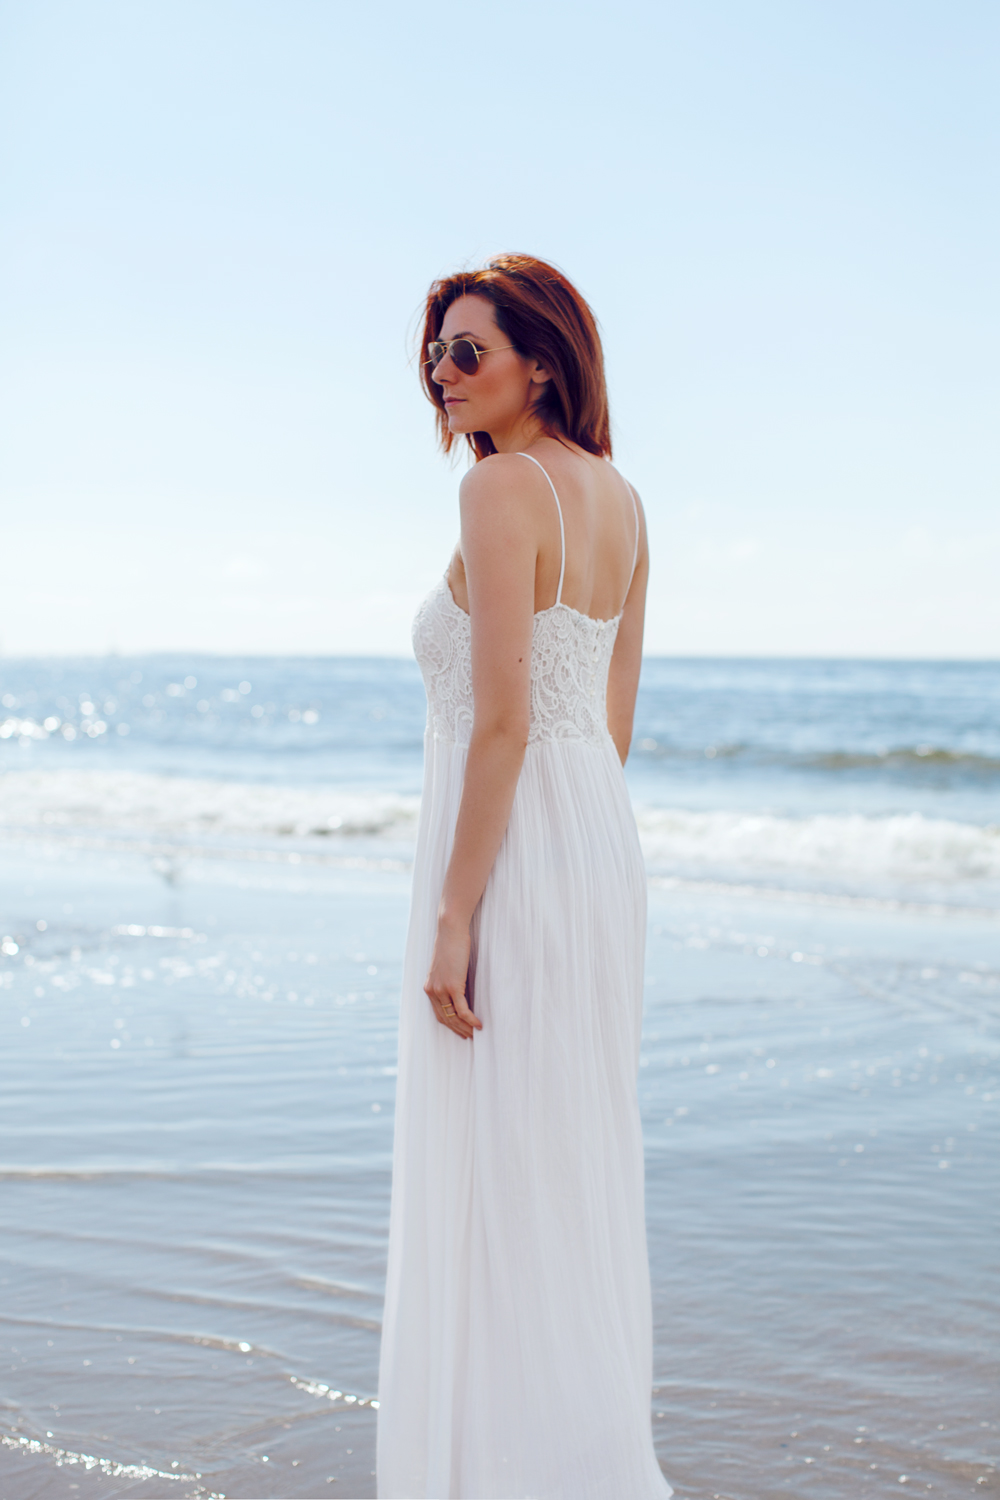 Maxi dress in the summer